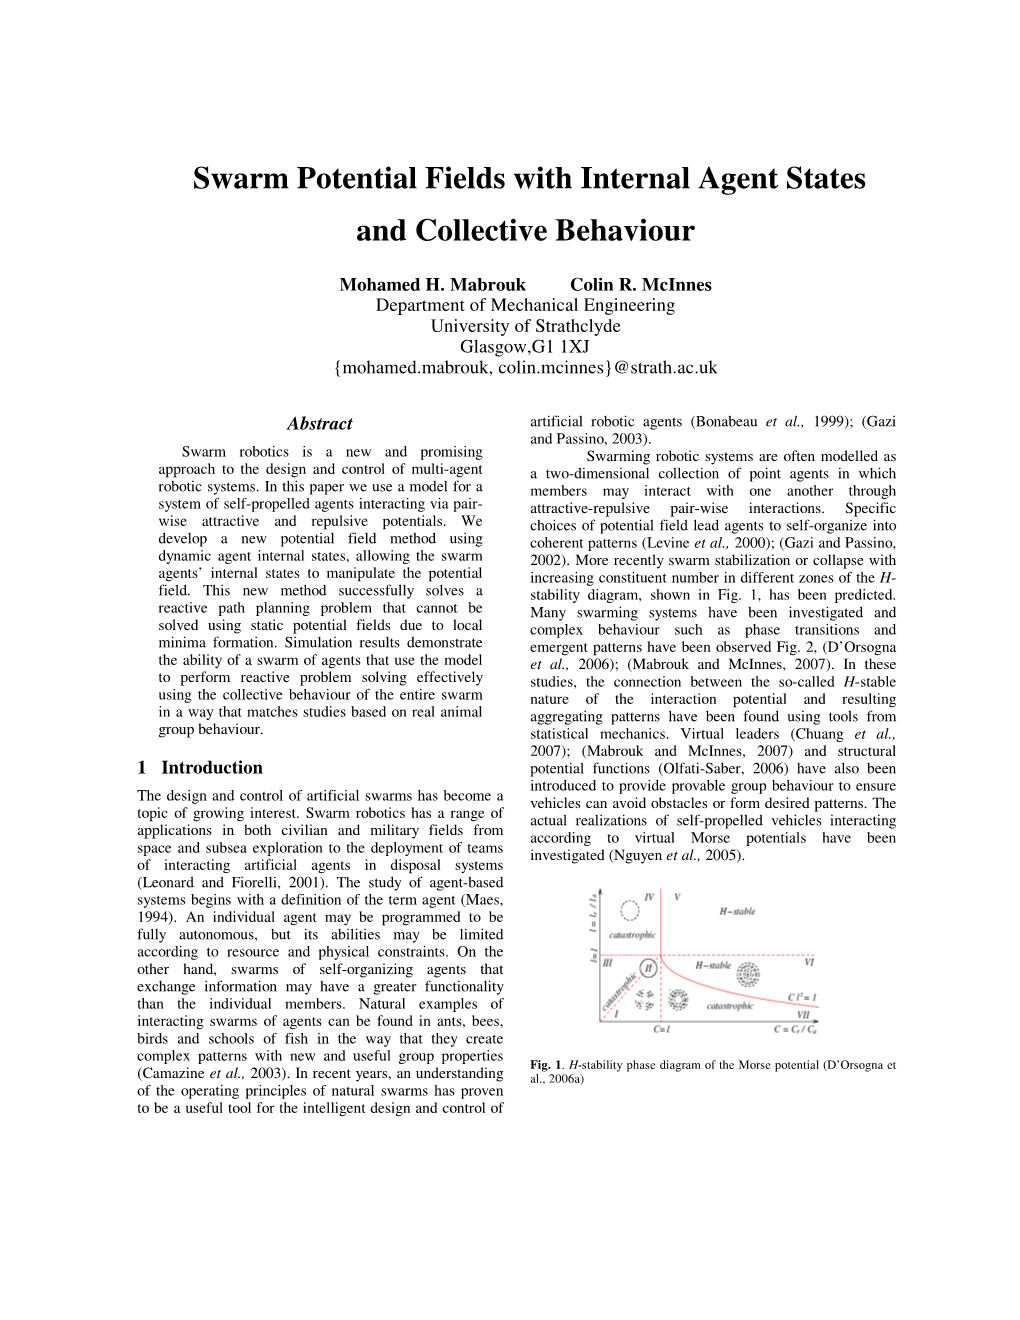 Swarm Potential Fields with Internal Agent States and Collective Behaviour